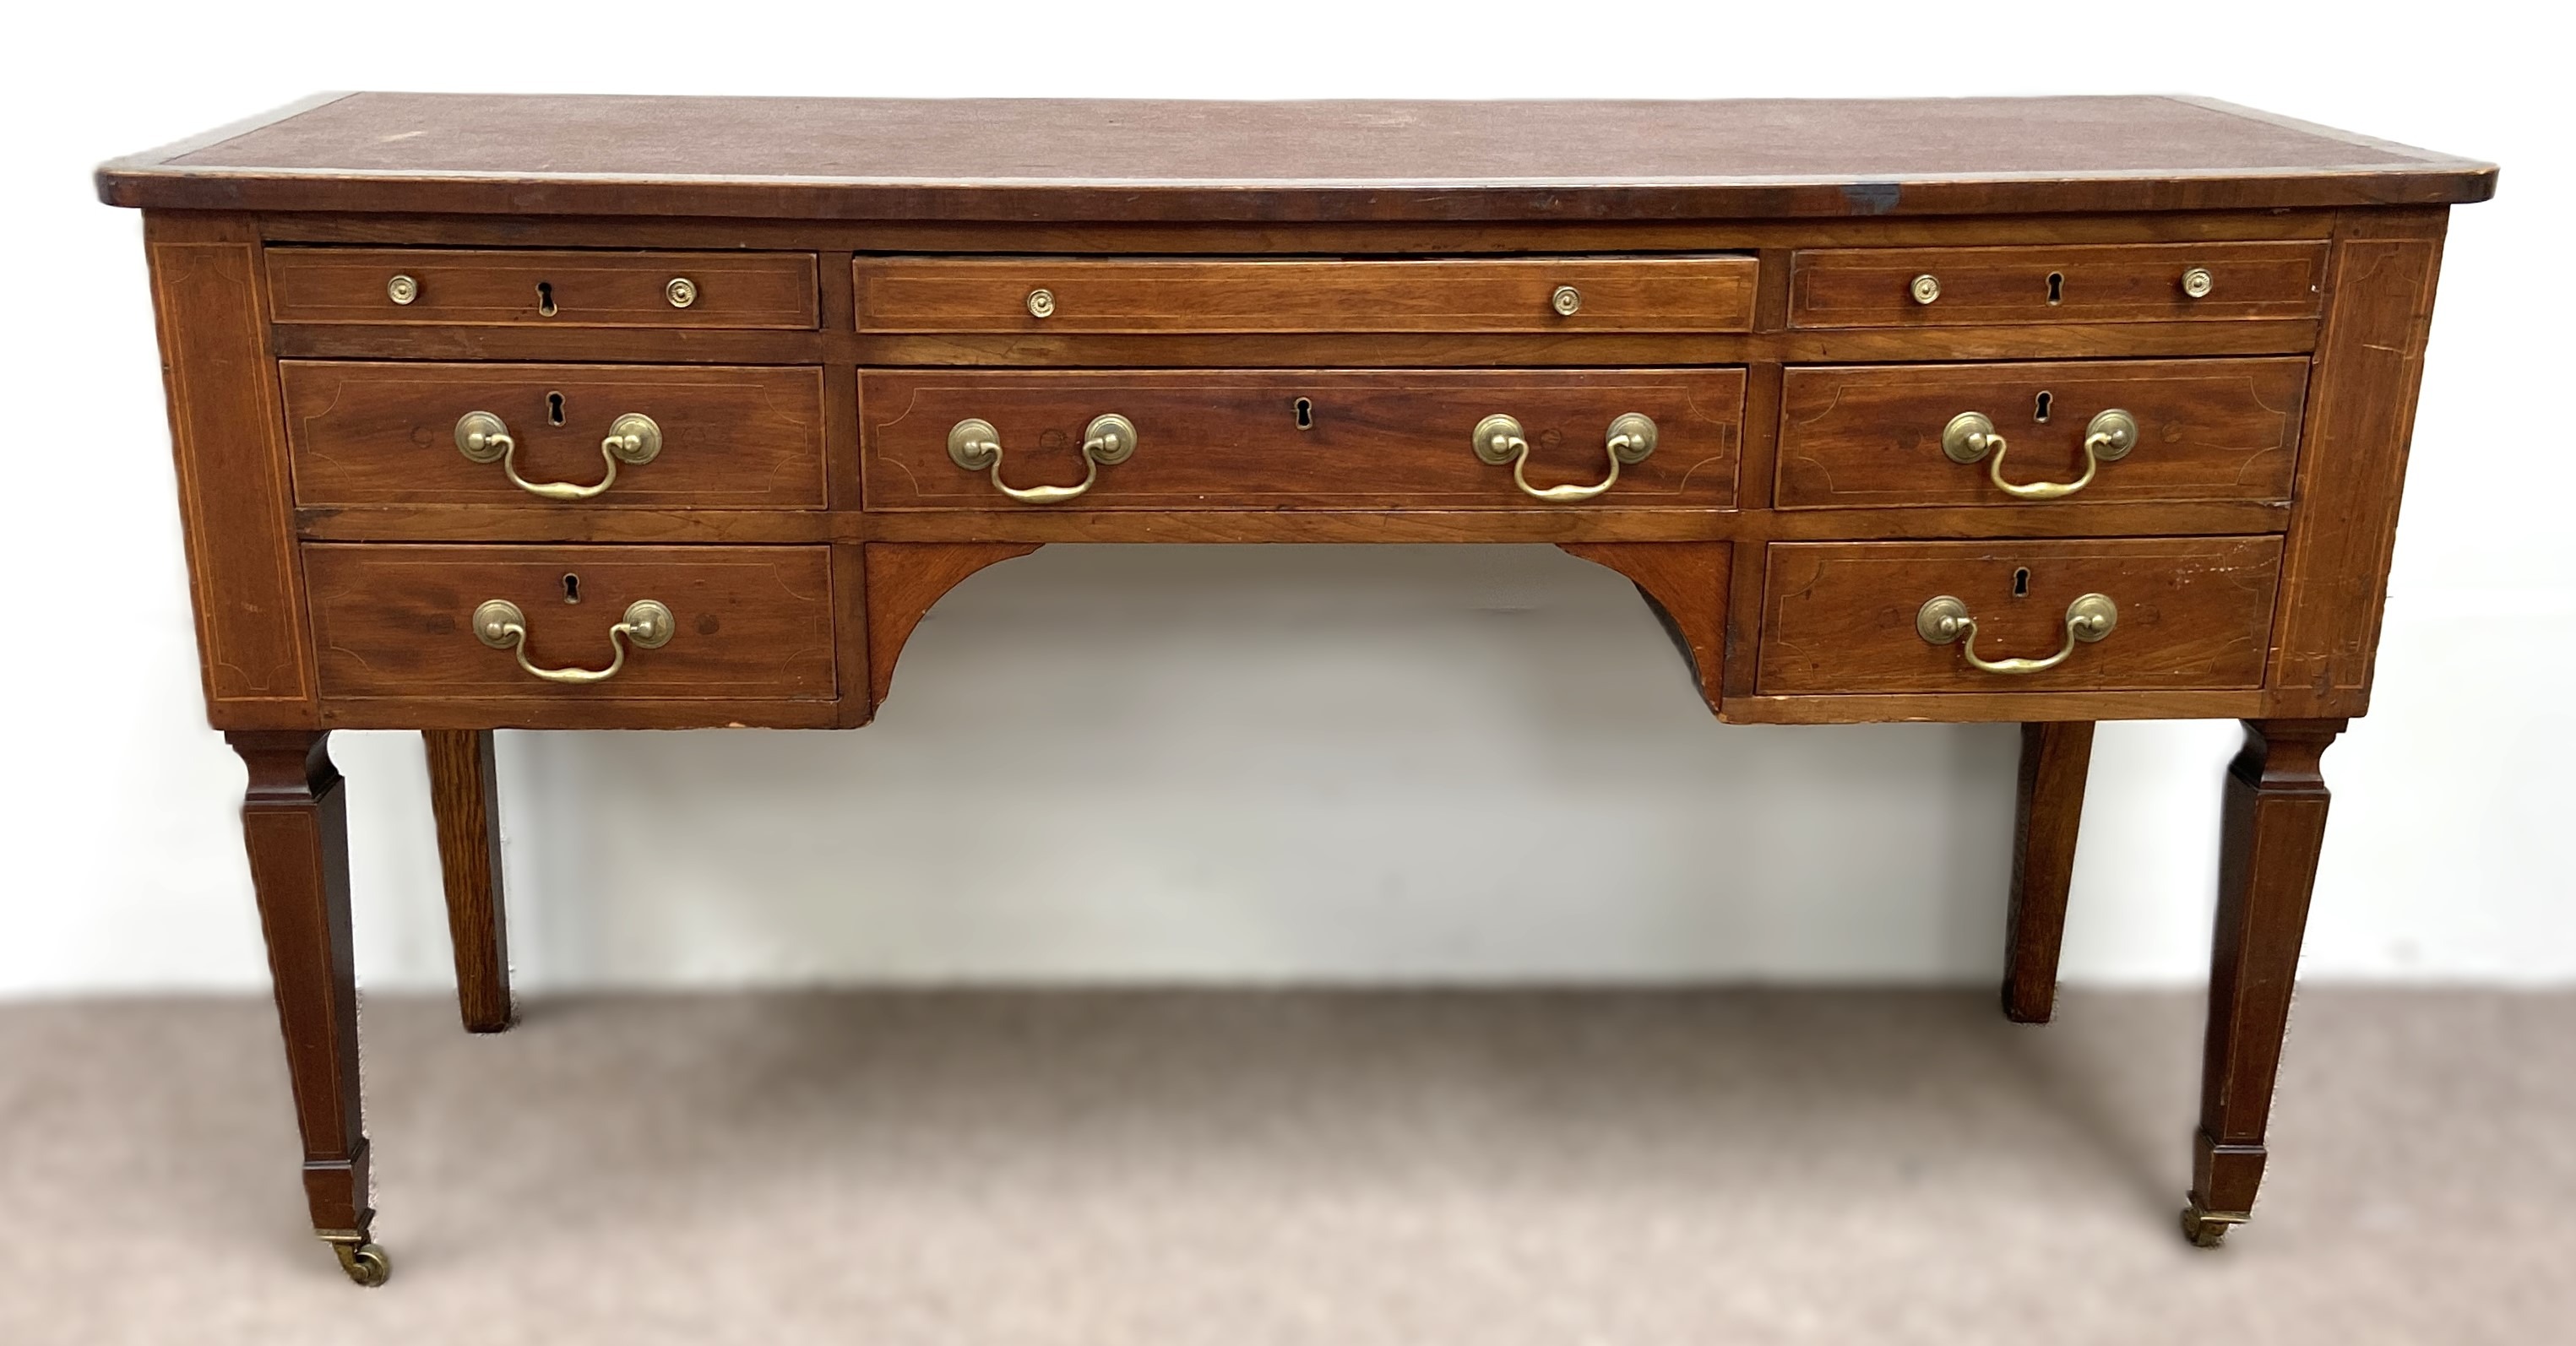 A Georgian style  mahogany combined sideboard, writing table, late 18th century and later